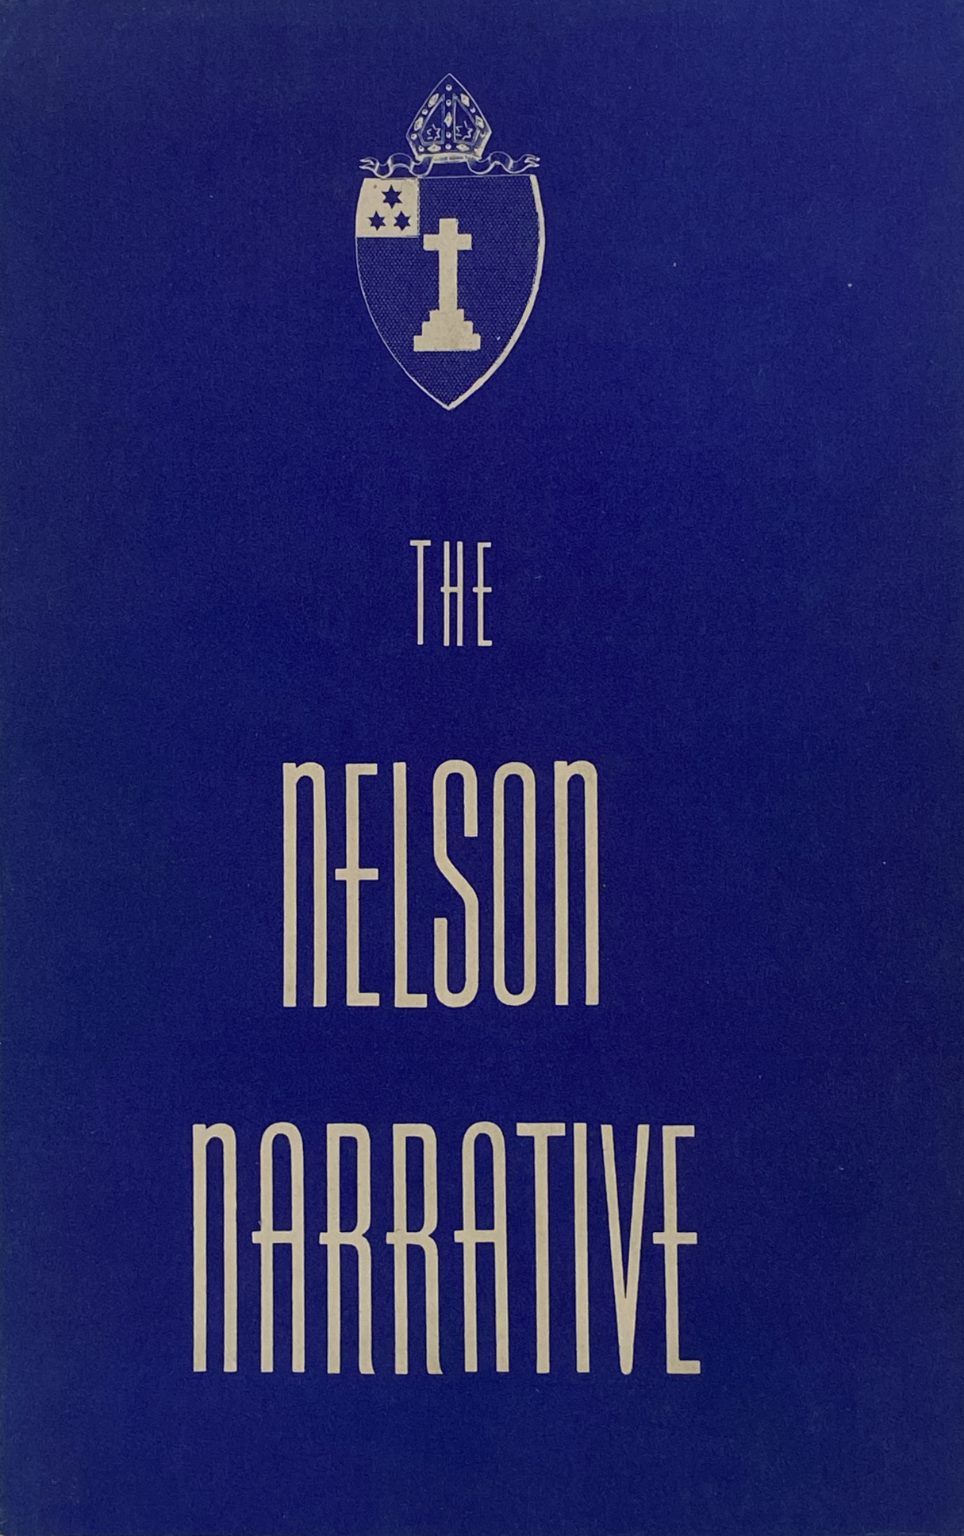 THE NELSON NARRATIVE